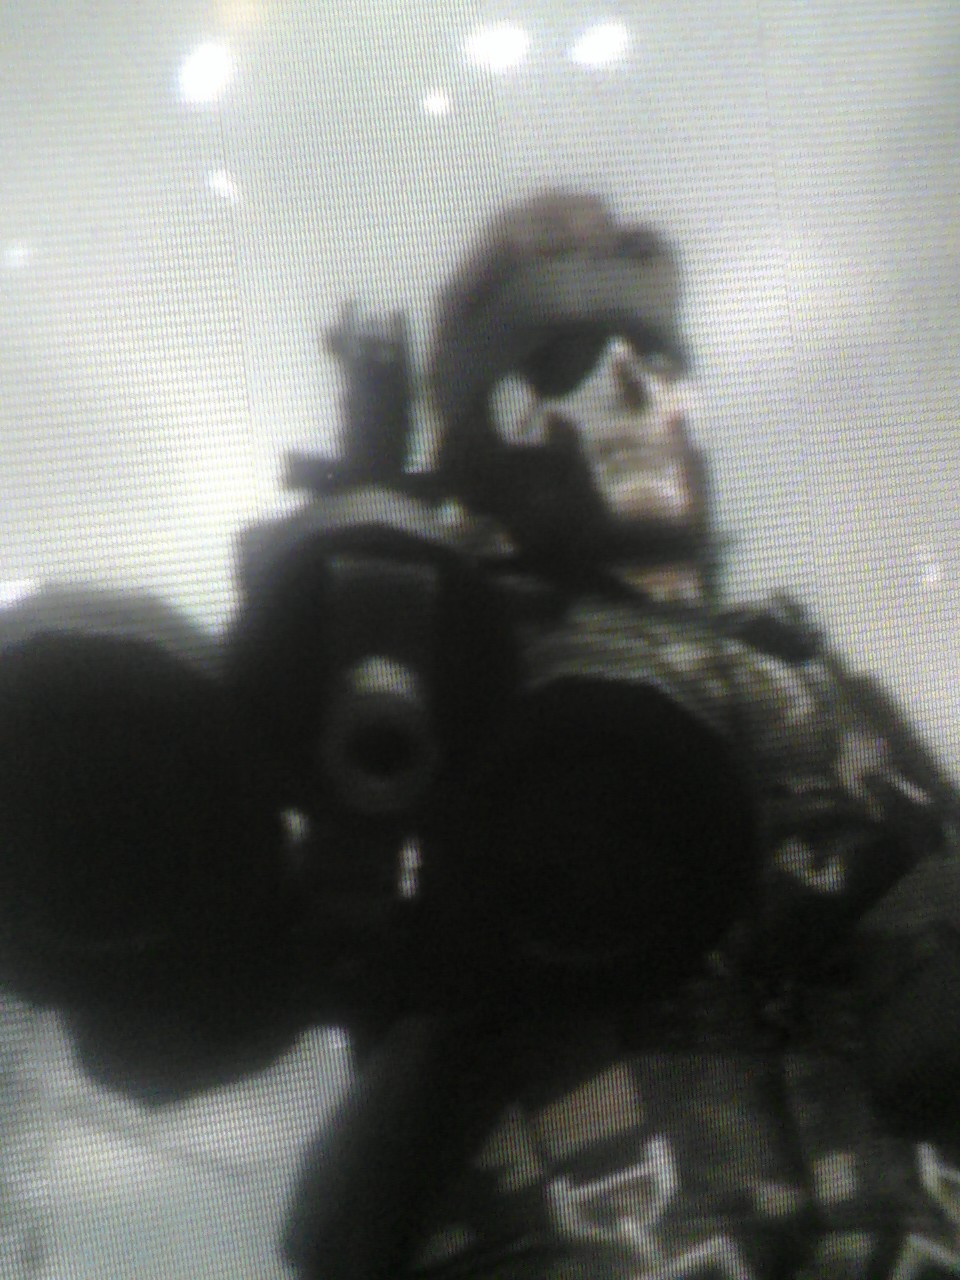 from mgs 3. has on the sorrows camo and zombie facepaint holding the patriot